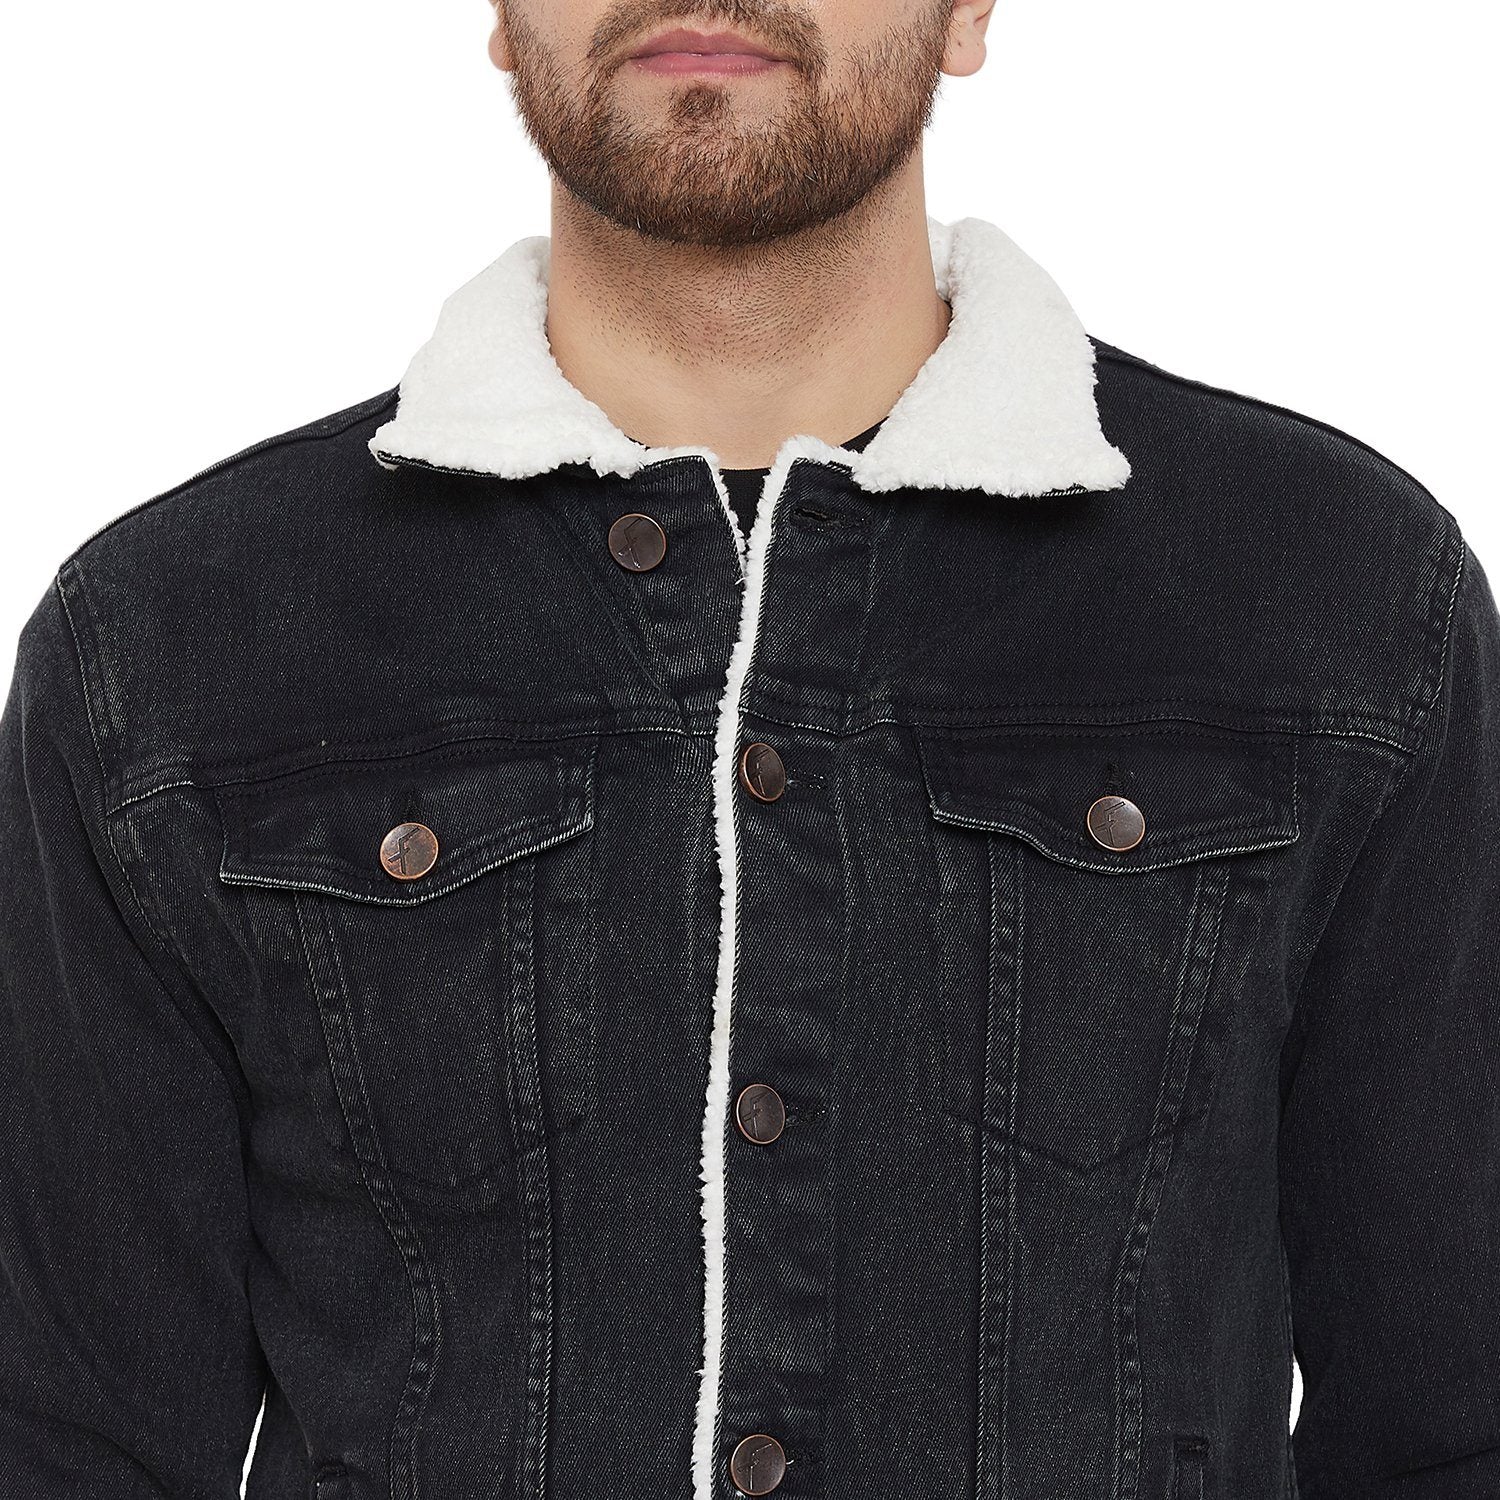 Shop Faux Sherpa Denim Jacket for Men from latest collection at Forever 21   326123